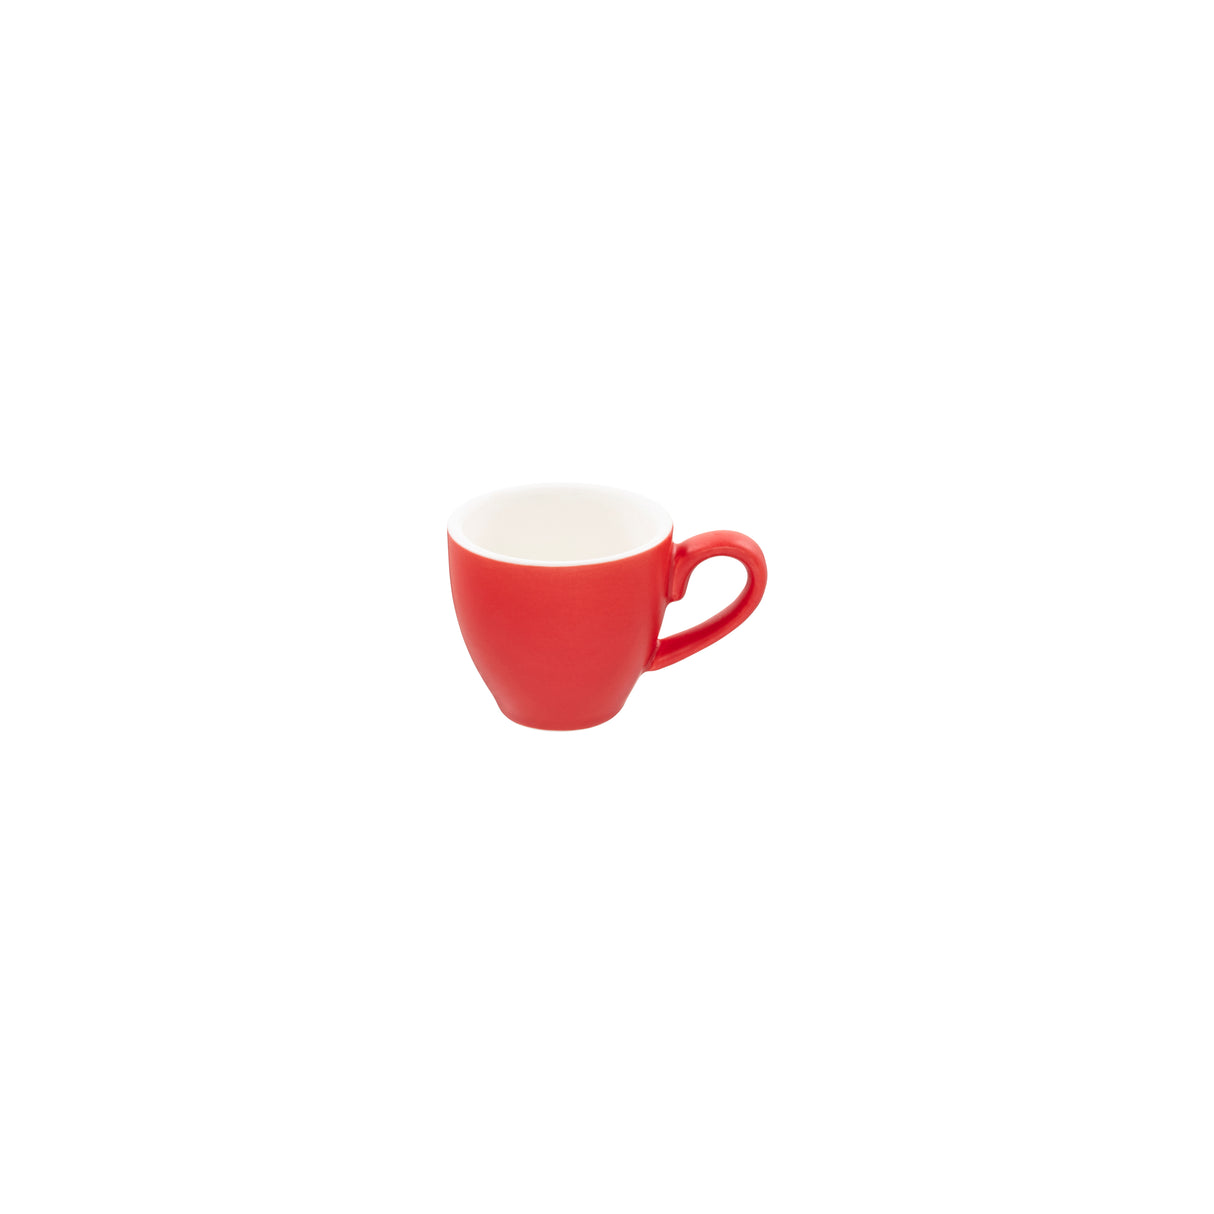 Espresso Cup - Rosso, 75ml: Pack of 6